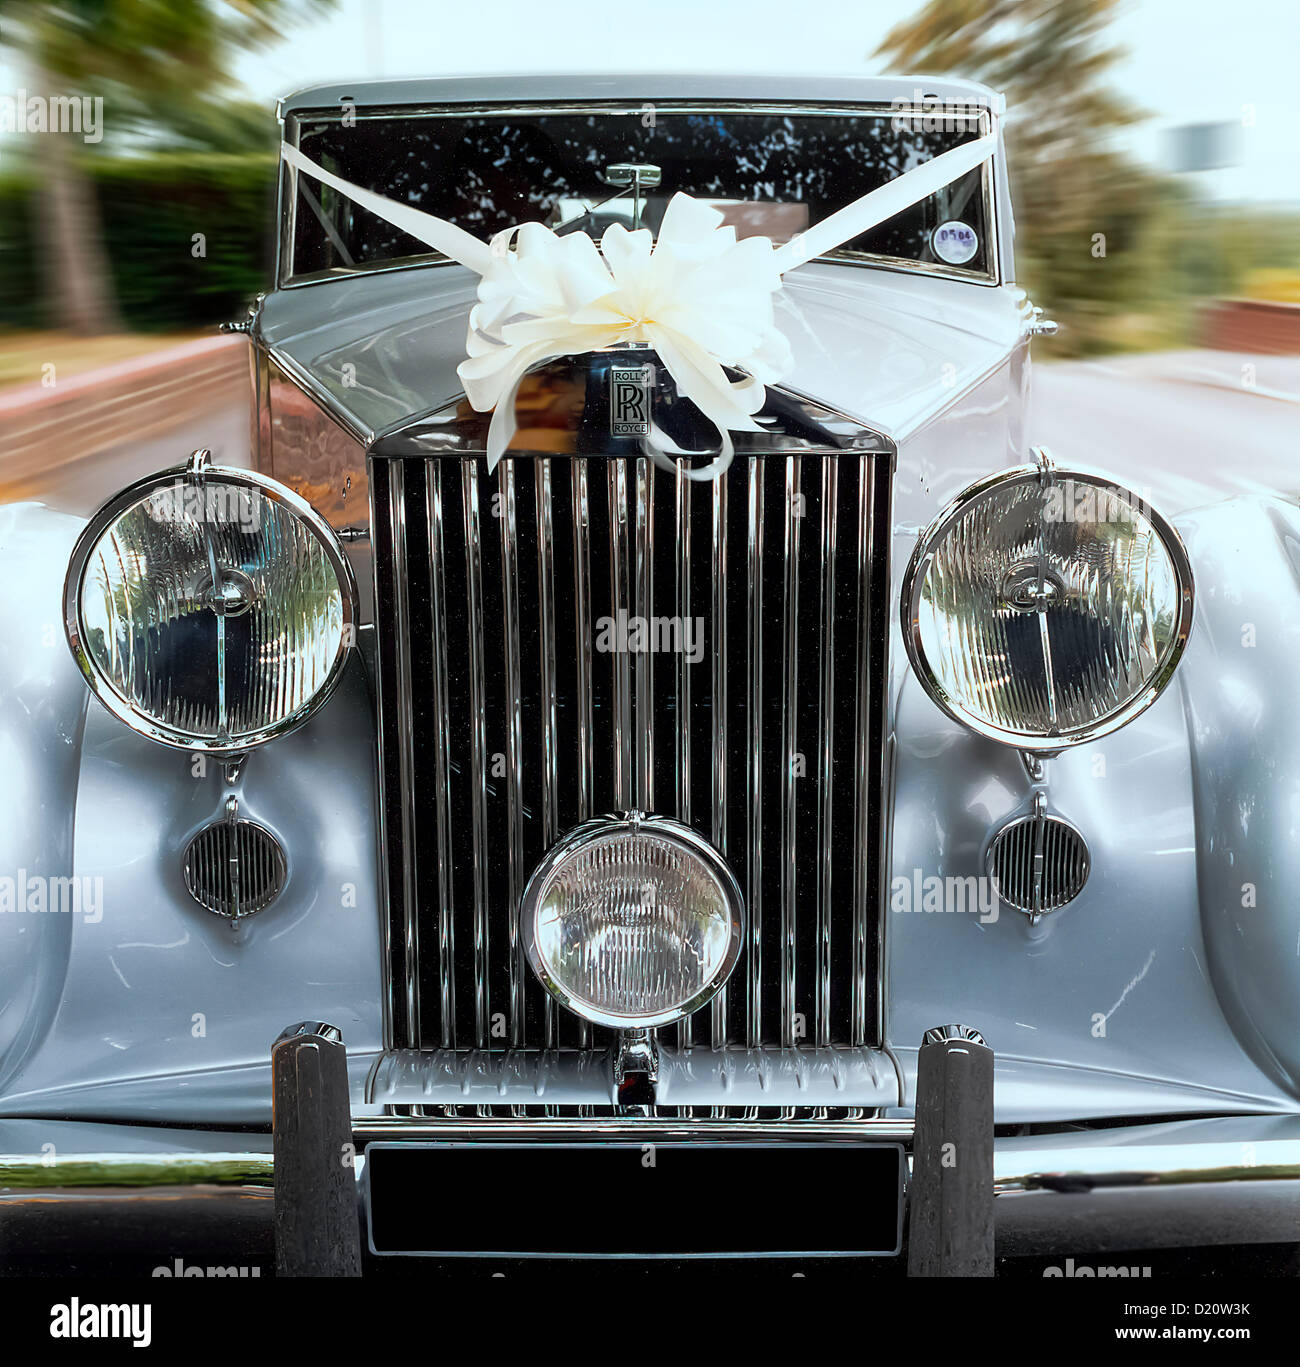 Front of a Rolls-Royce classic wedding car Stock Photo